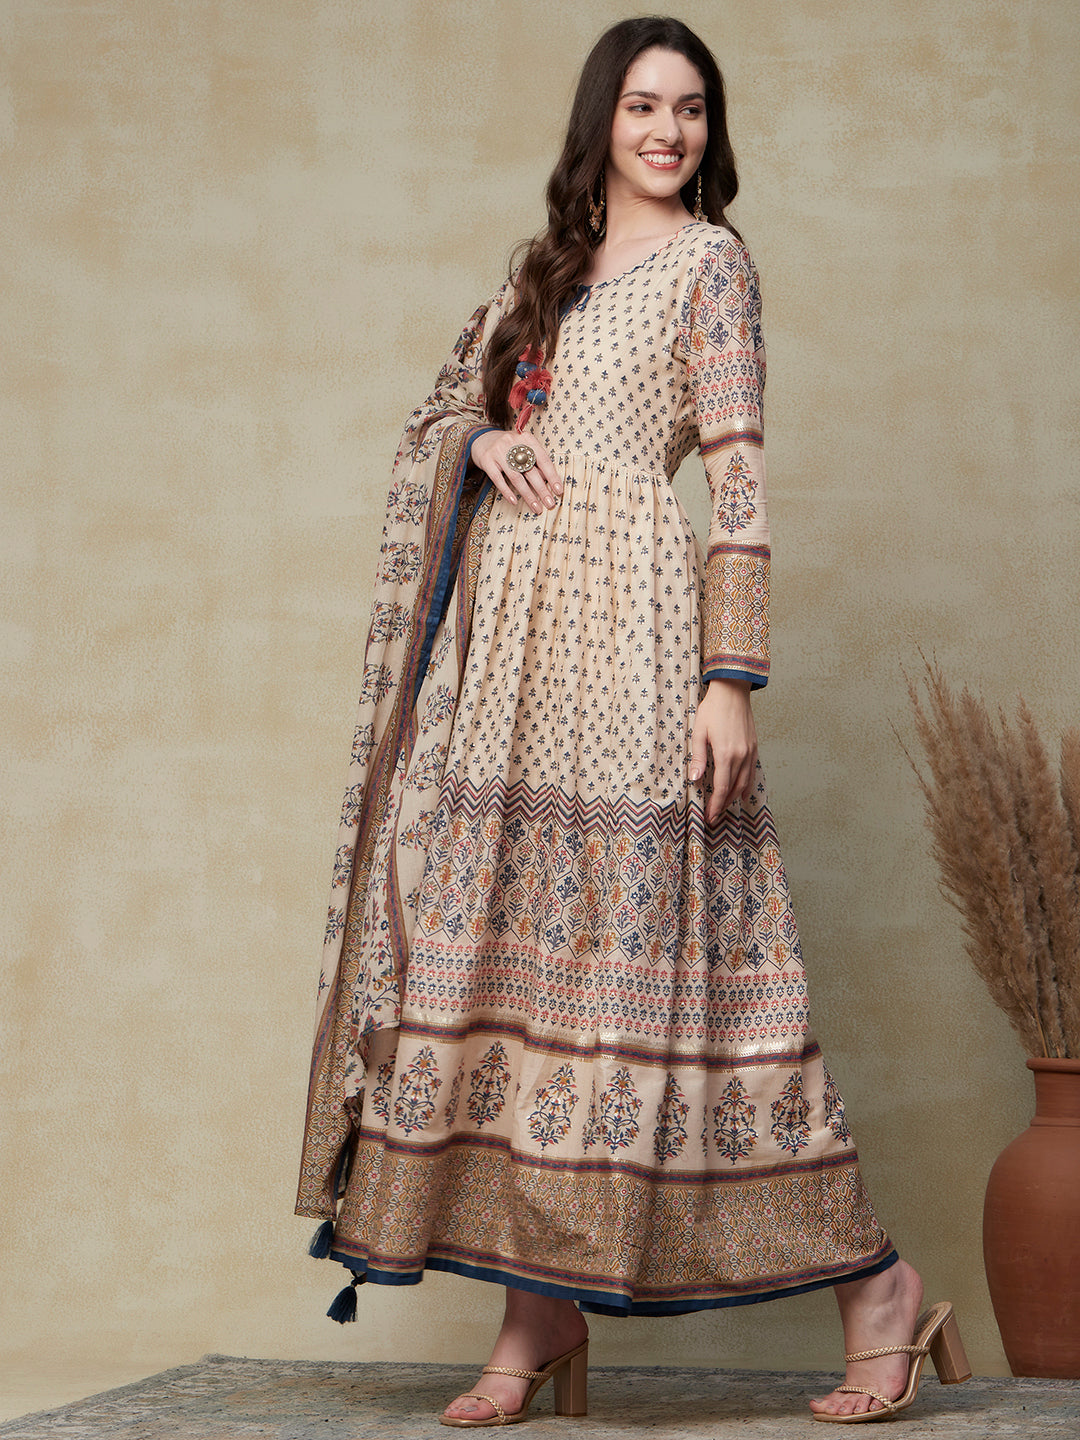 Ethnic Foil Printed Pompom Latkans Embellished Gathered Maxi Dress with Floral Printed Dupatta - Cream